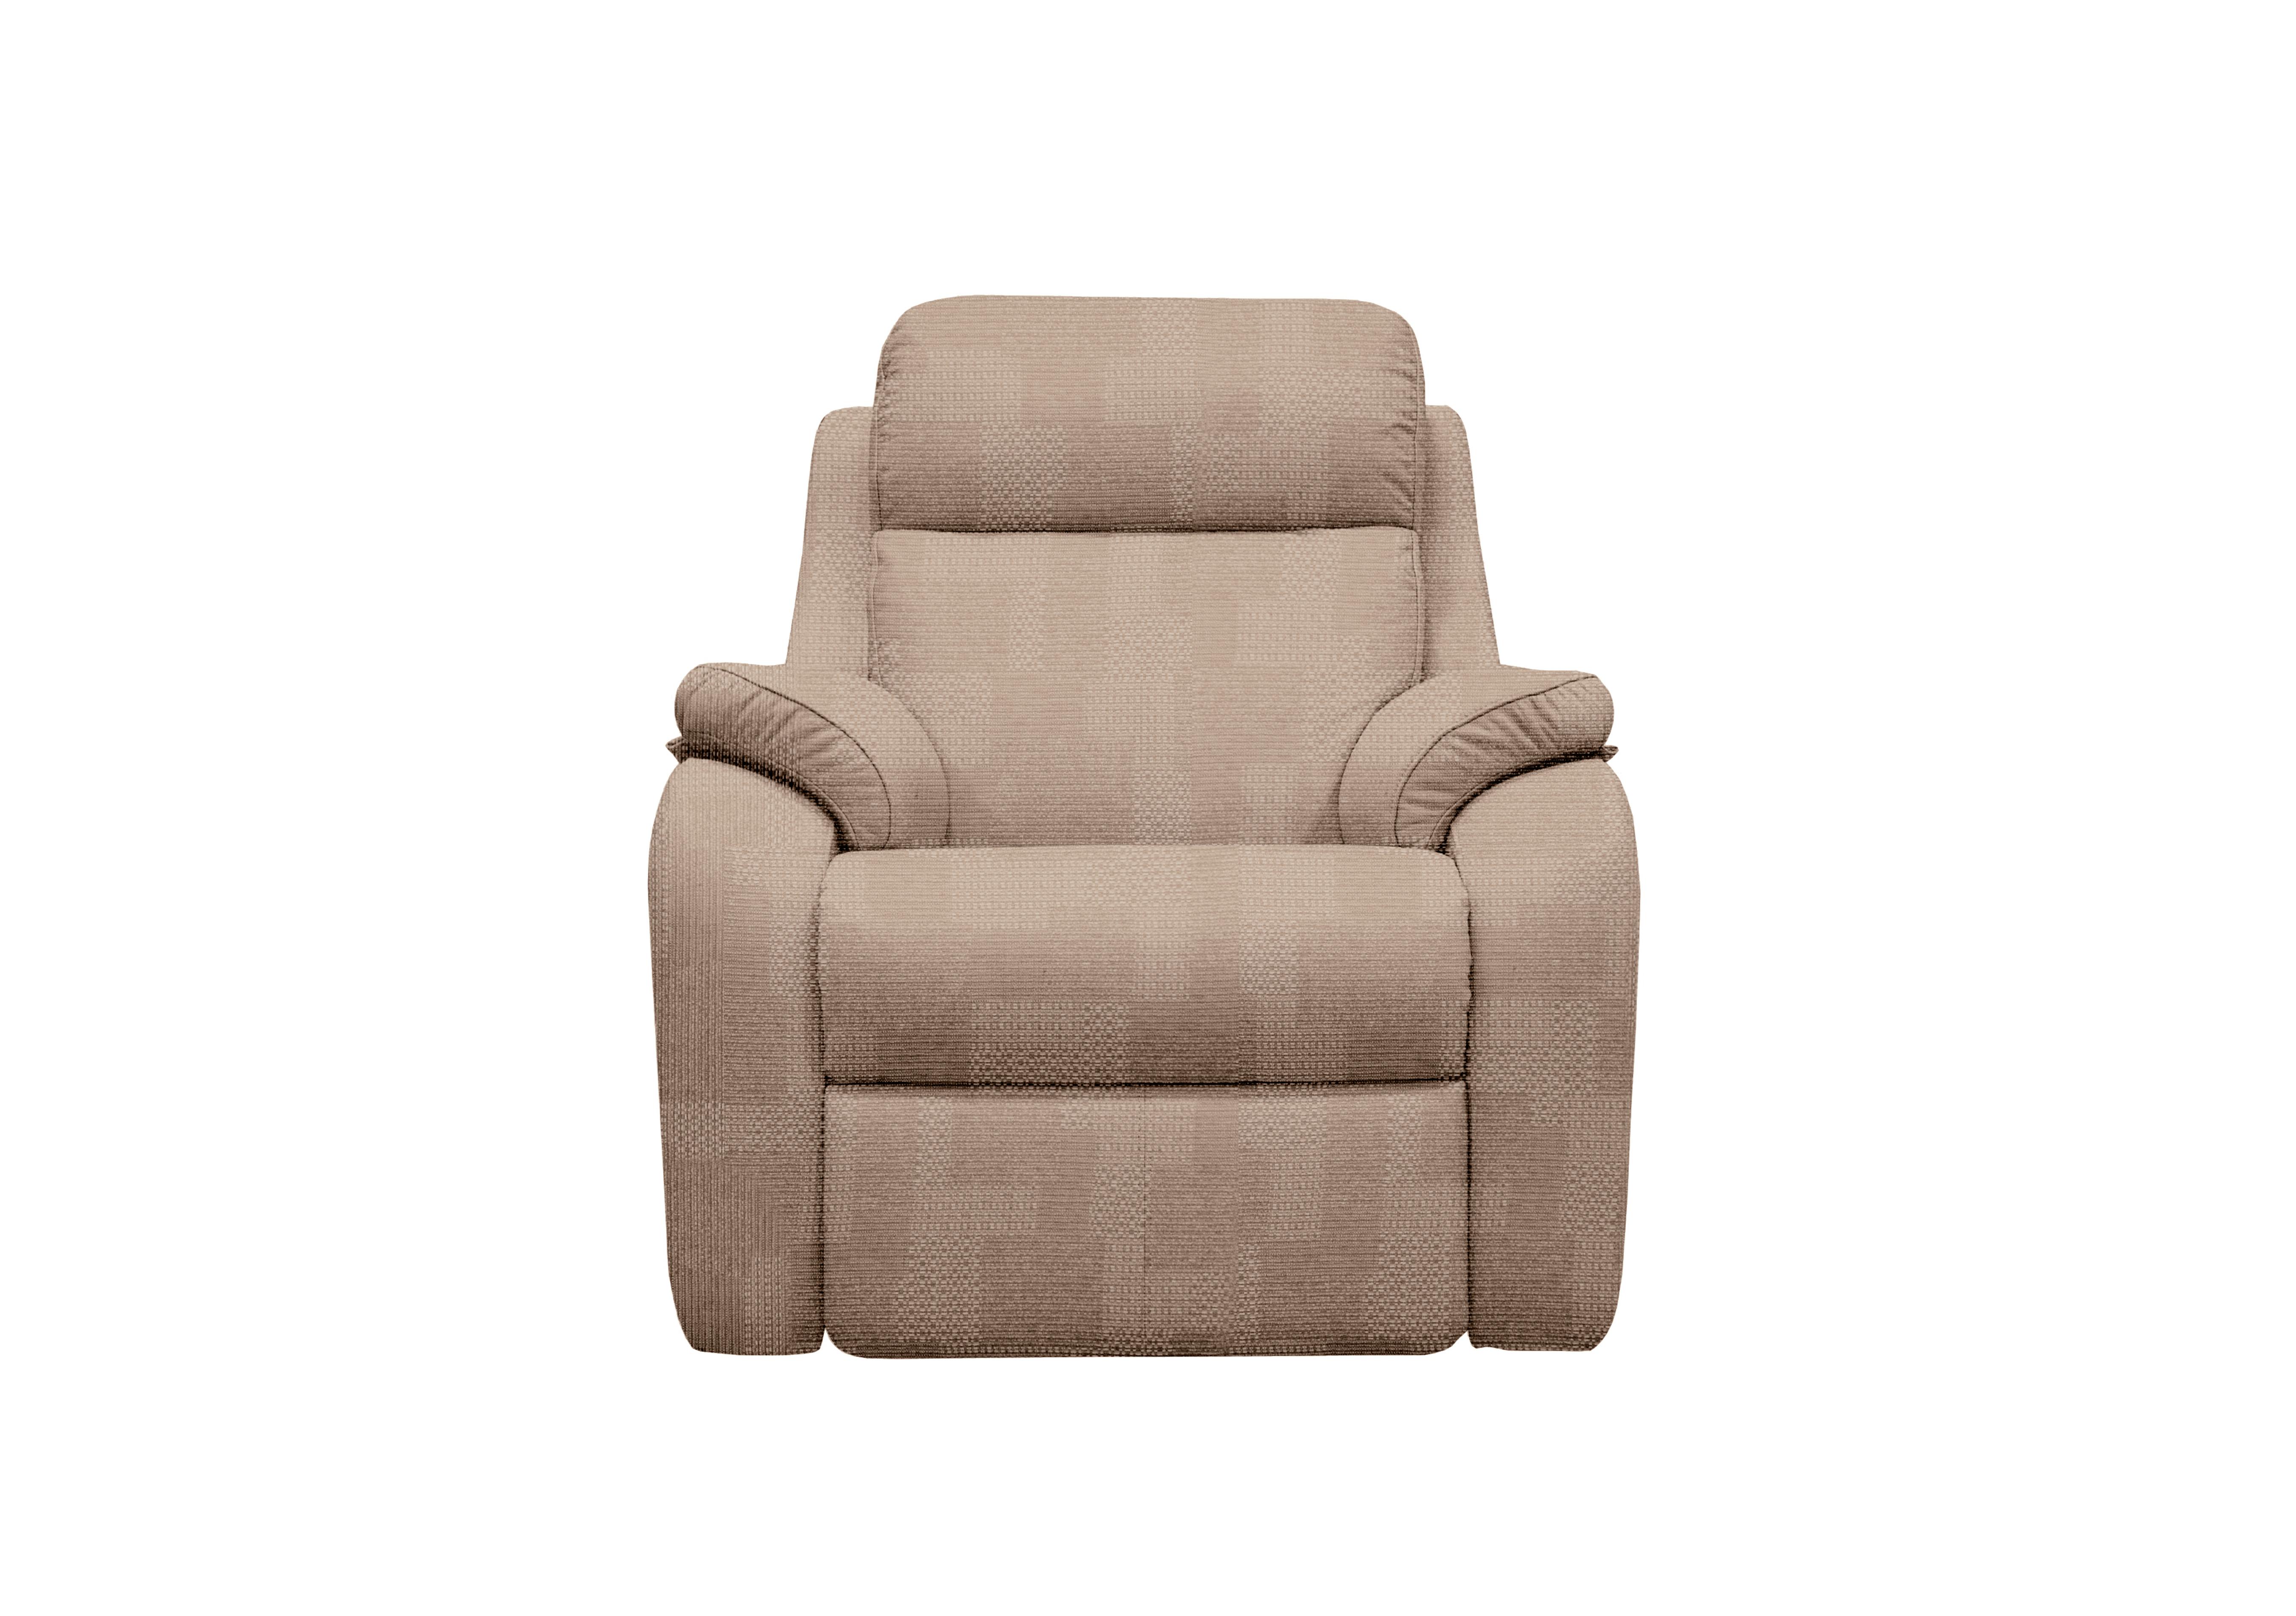 Kingsbury Fabric Power Recliner Armchair with Power Headrests in A800 Faro Sand on Furniture Village